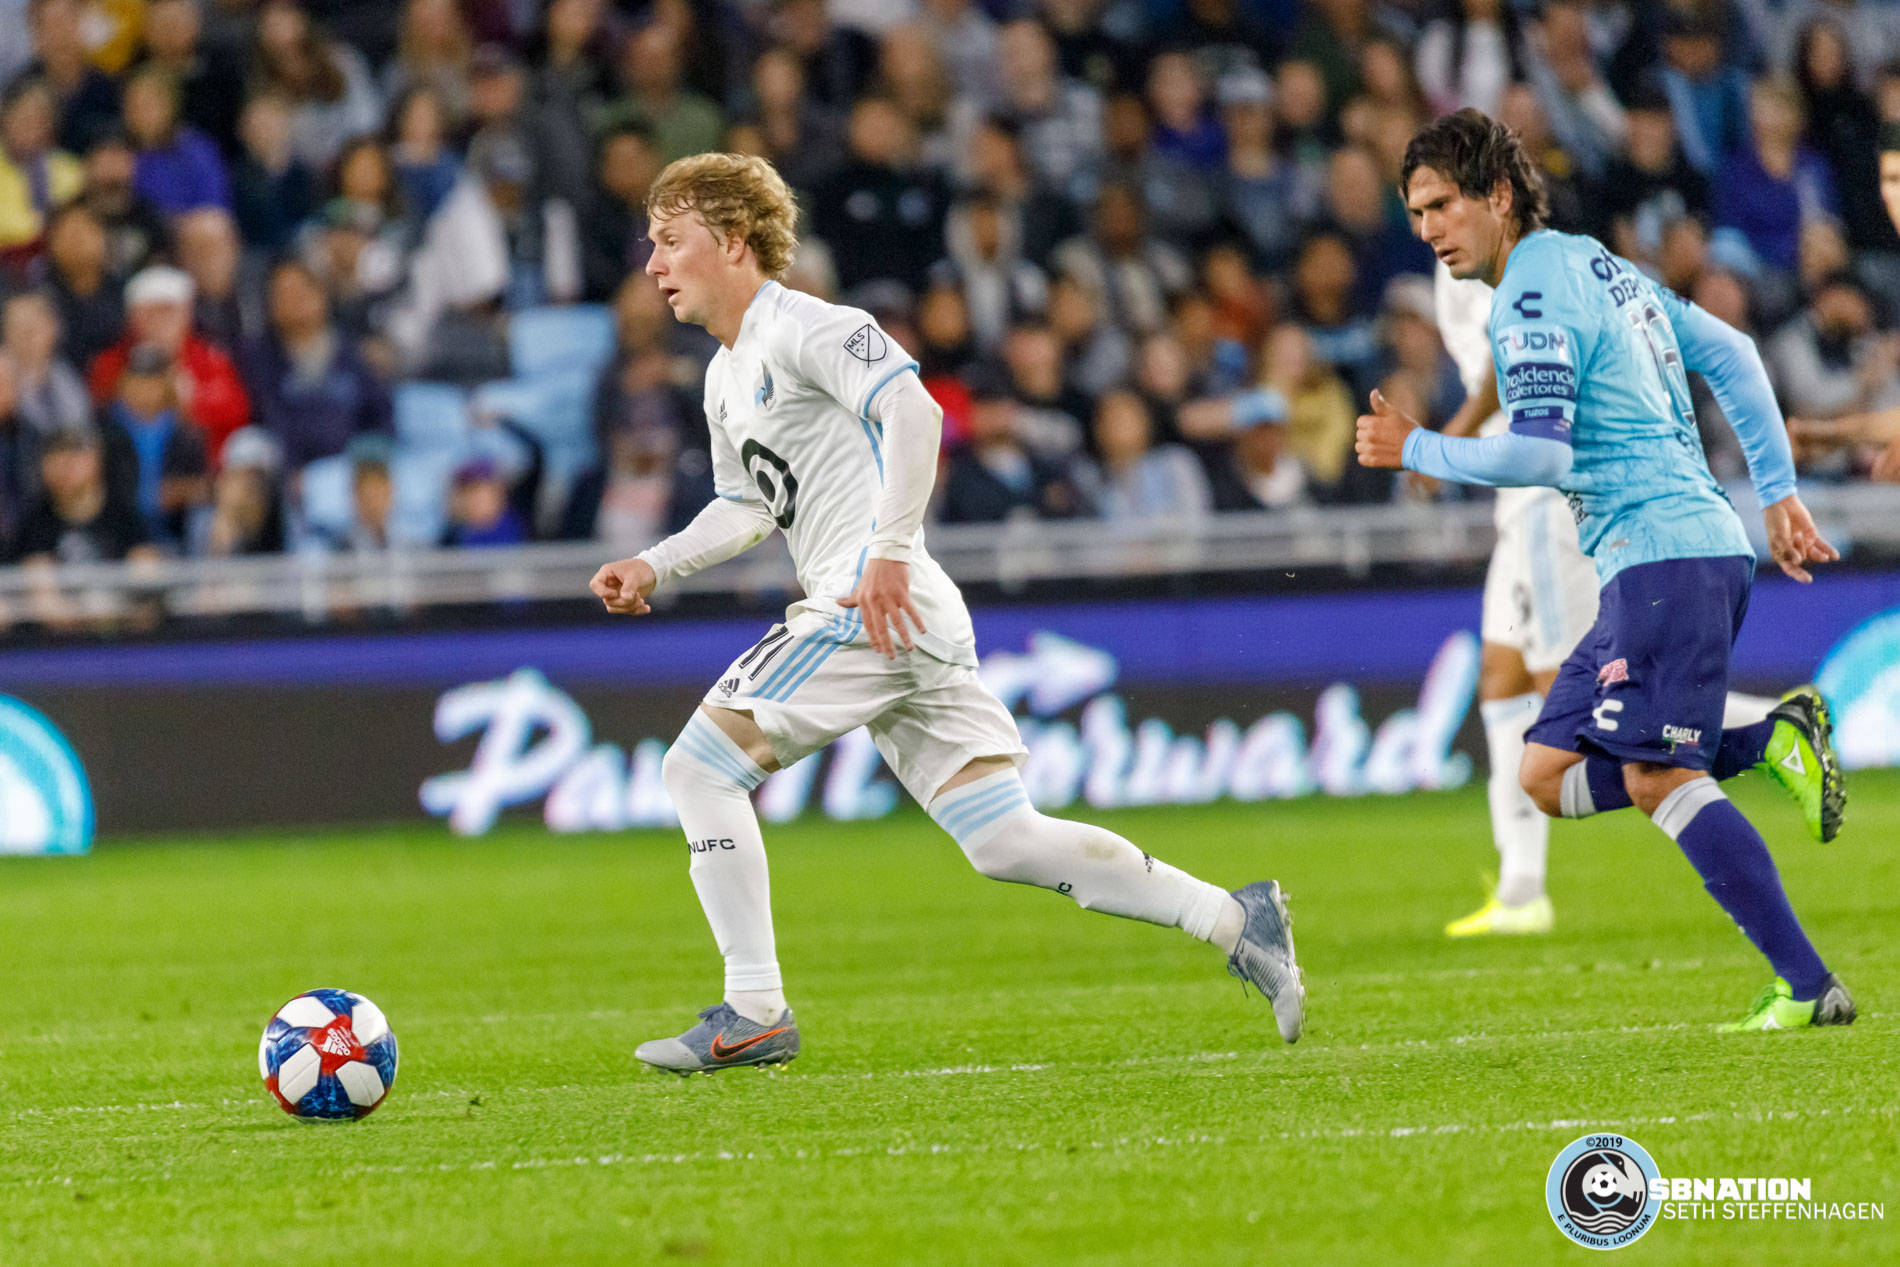 September 7, 2019 - Saint Paul, Minnesota, United States - Minnesota United midfielder Thomas Chacon (11) dribbles the ball during the  international friendly match against Pachuca at Allianz Field. 
